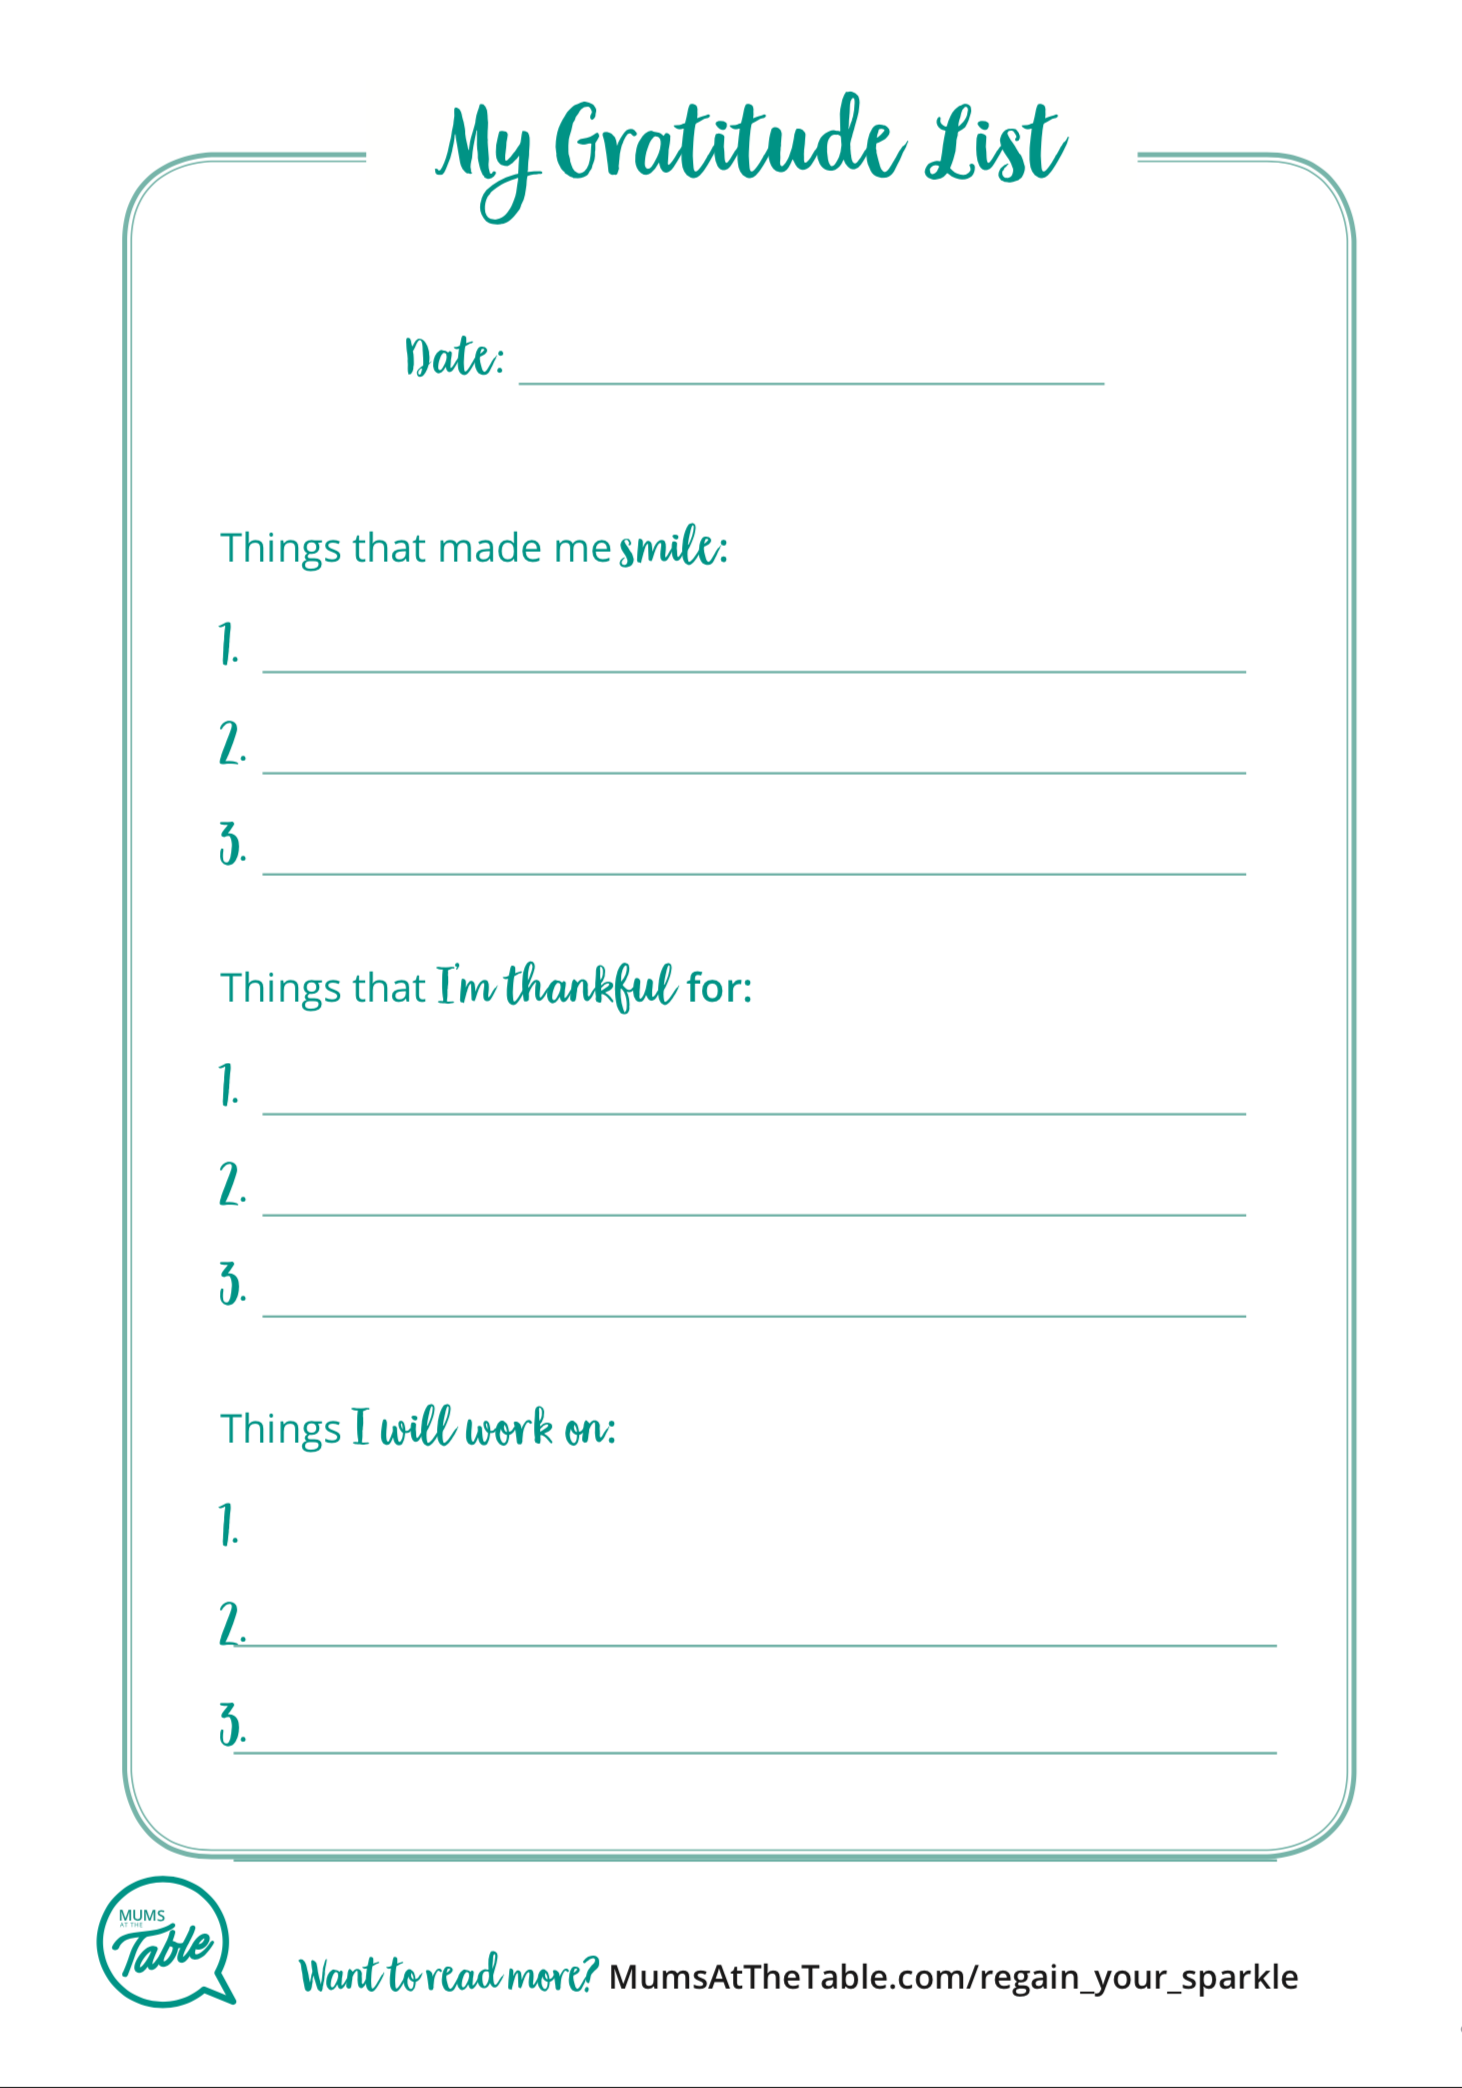 free-printable-gratitude-list-mums-at-the-table